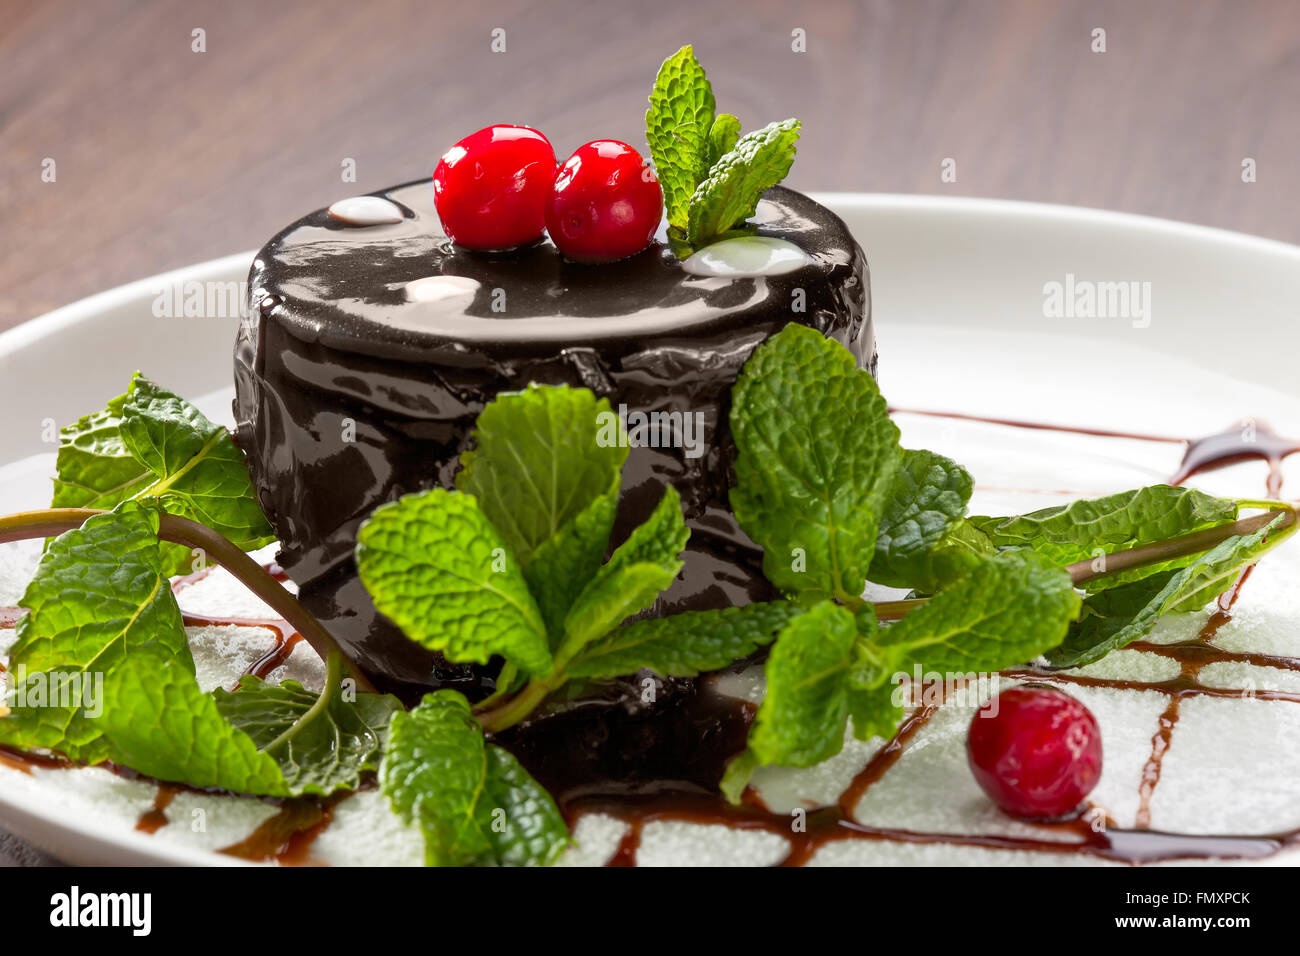 Chocolate cake, decorated with cherries and mint on a plate with ...